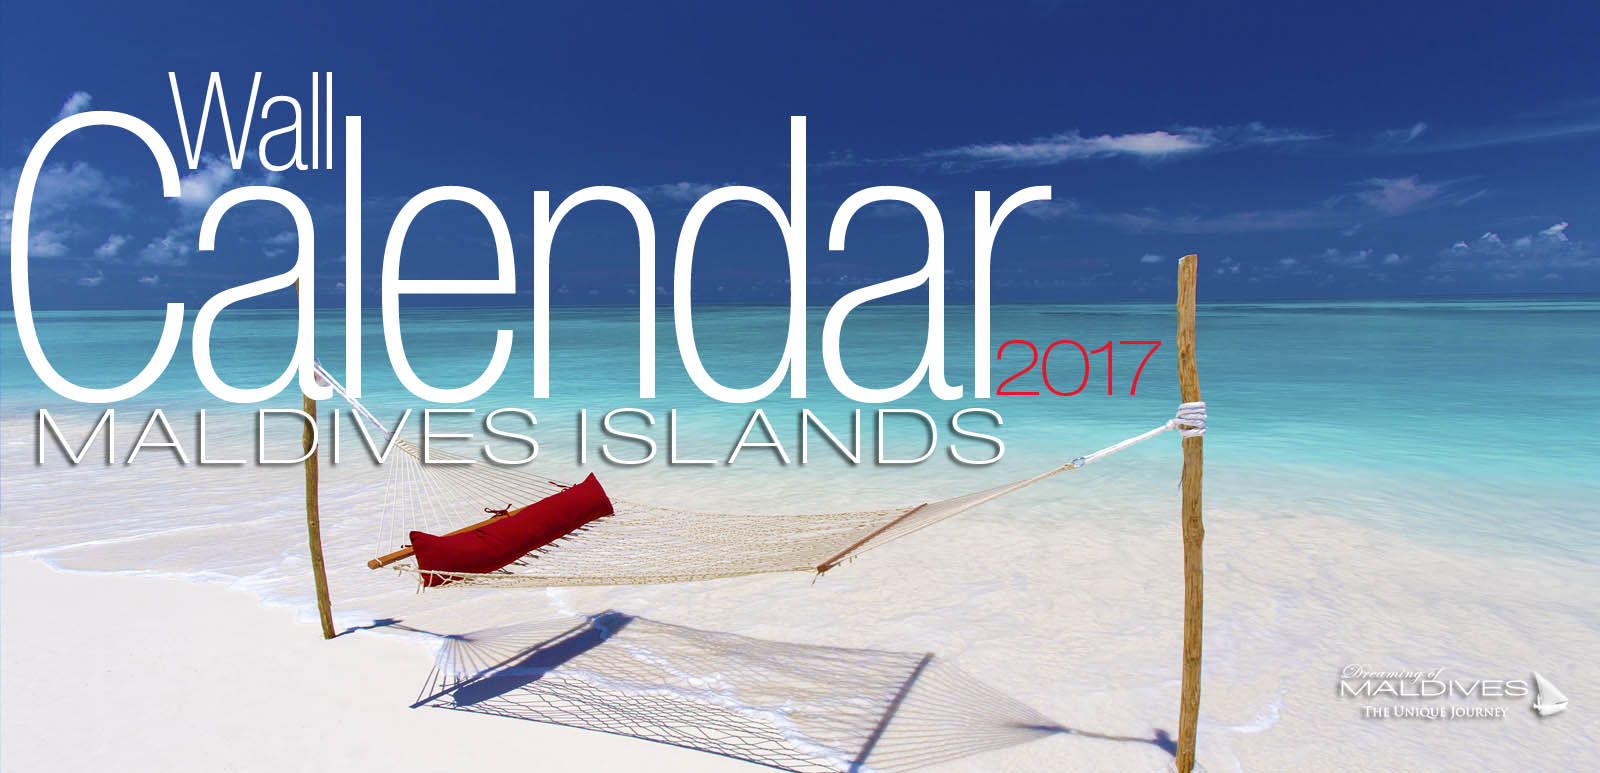 2017 Wall Calendar With Photos of The Maldives Islands